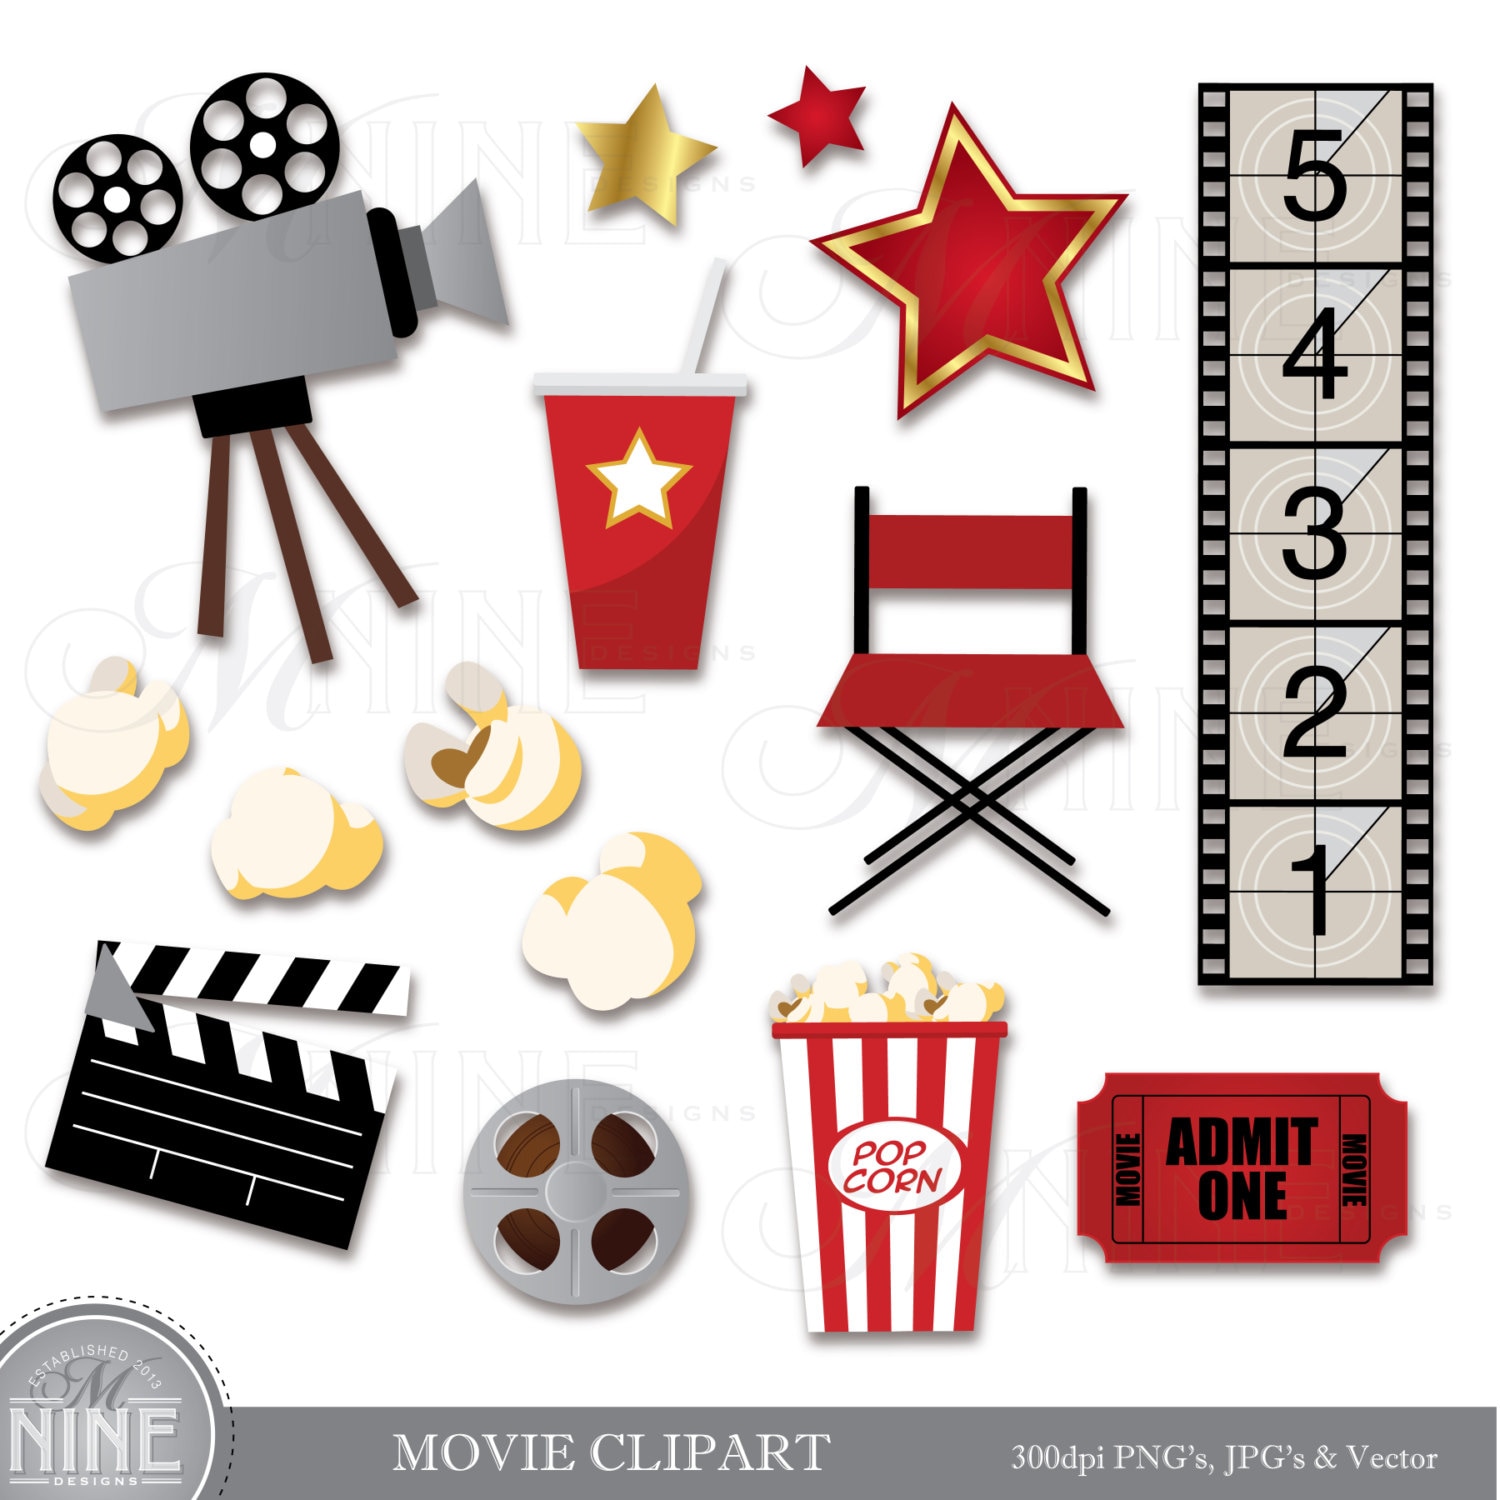 clipart of movie - photo #44